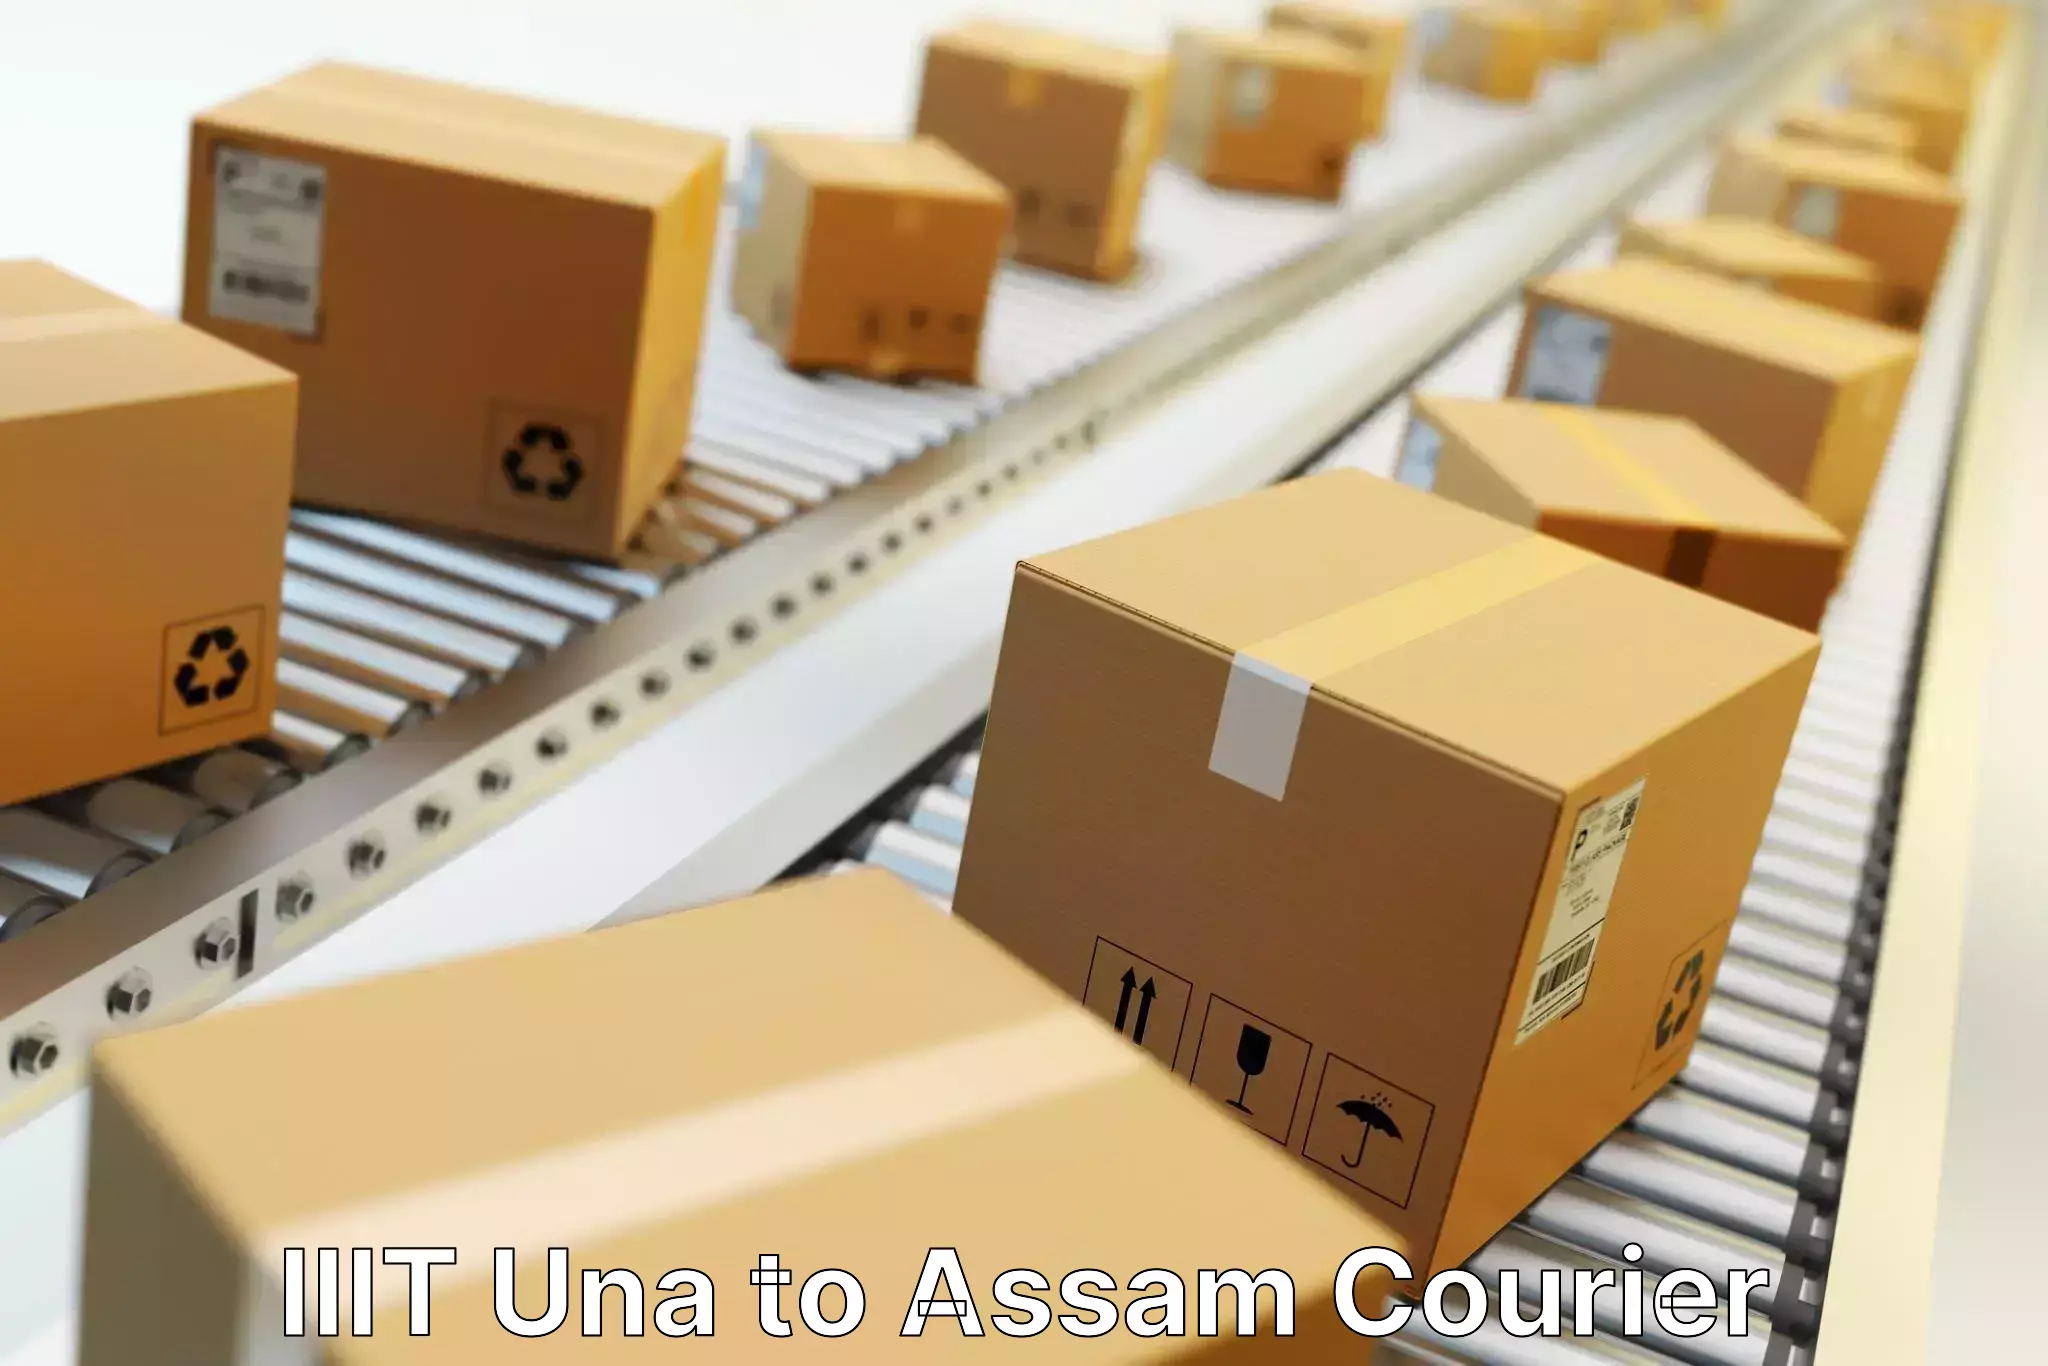 Global shipping networks in IIIT Una to Assam